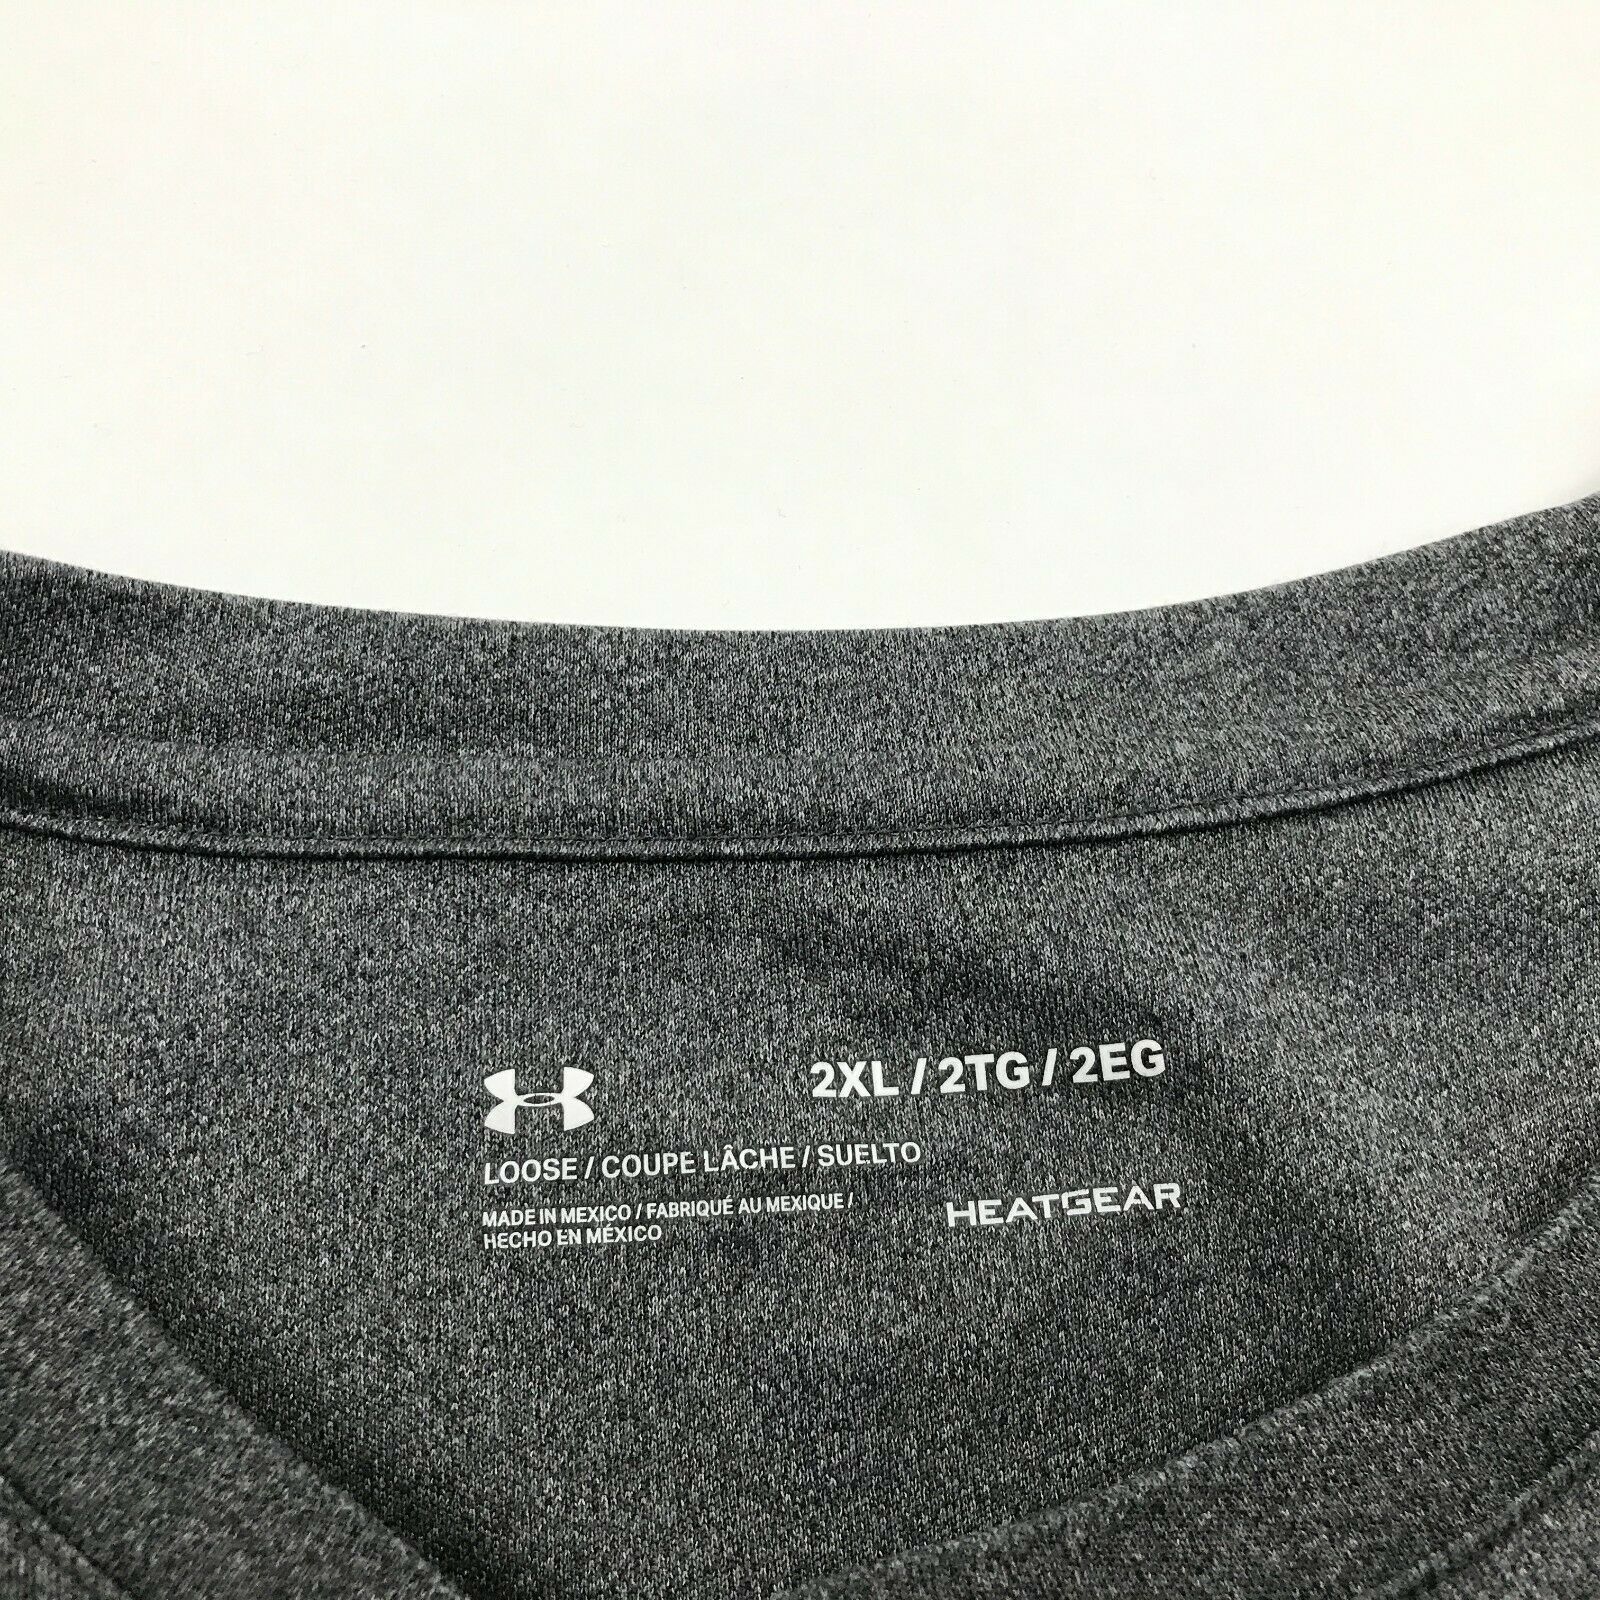 Under Armour Dry Fit Shirt Men's Size 2XL XXL Gray Performance Tee ...